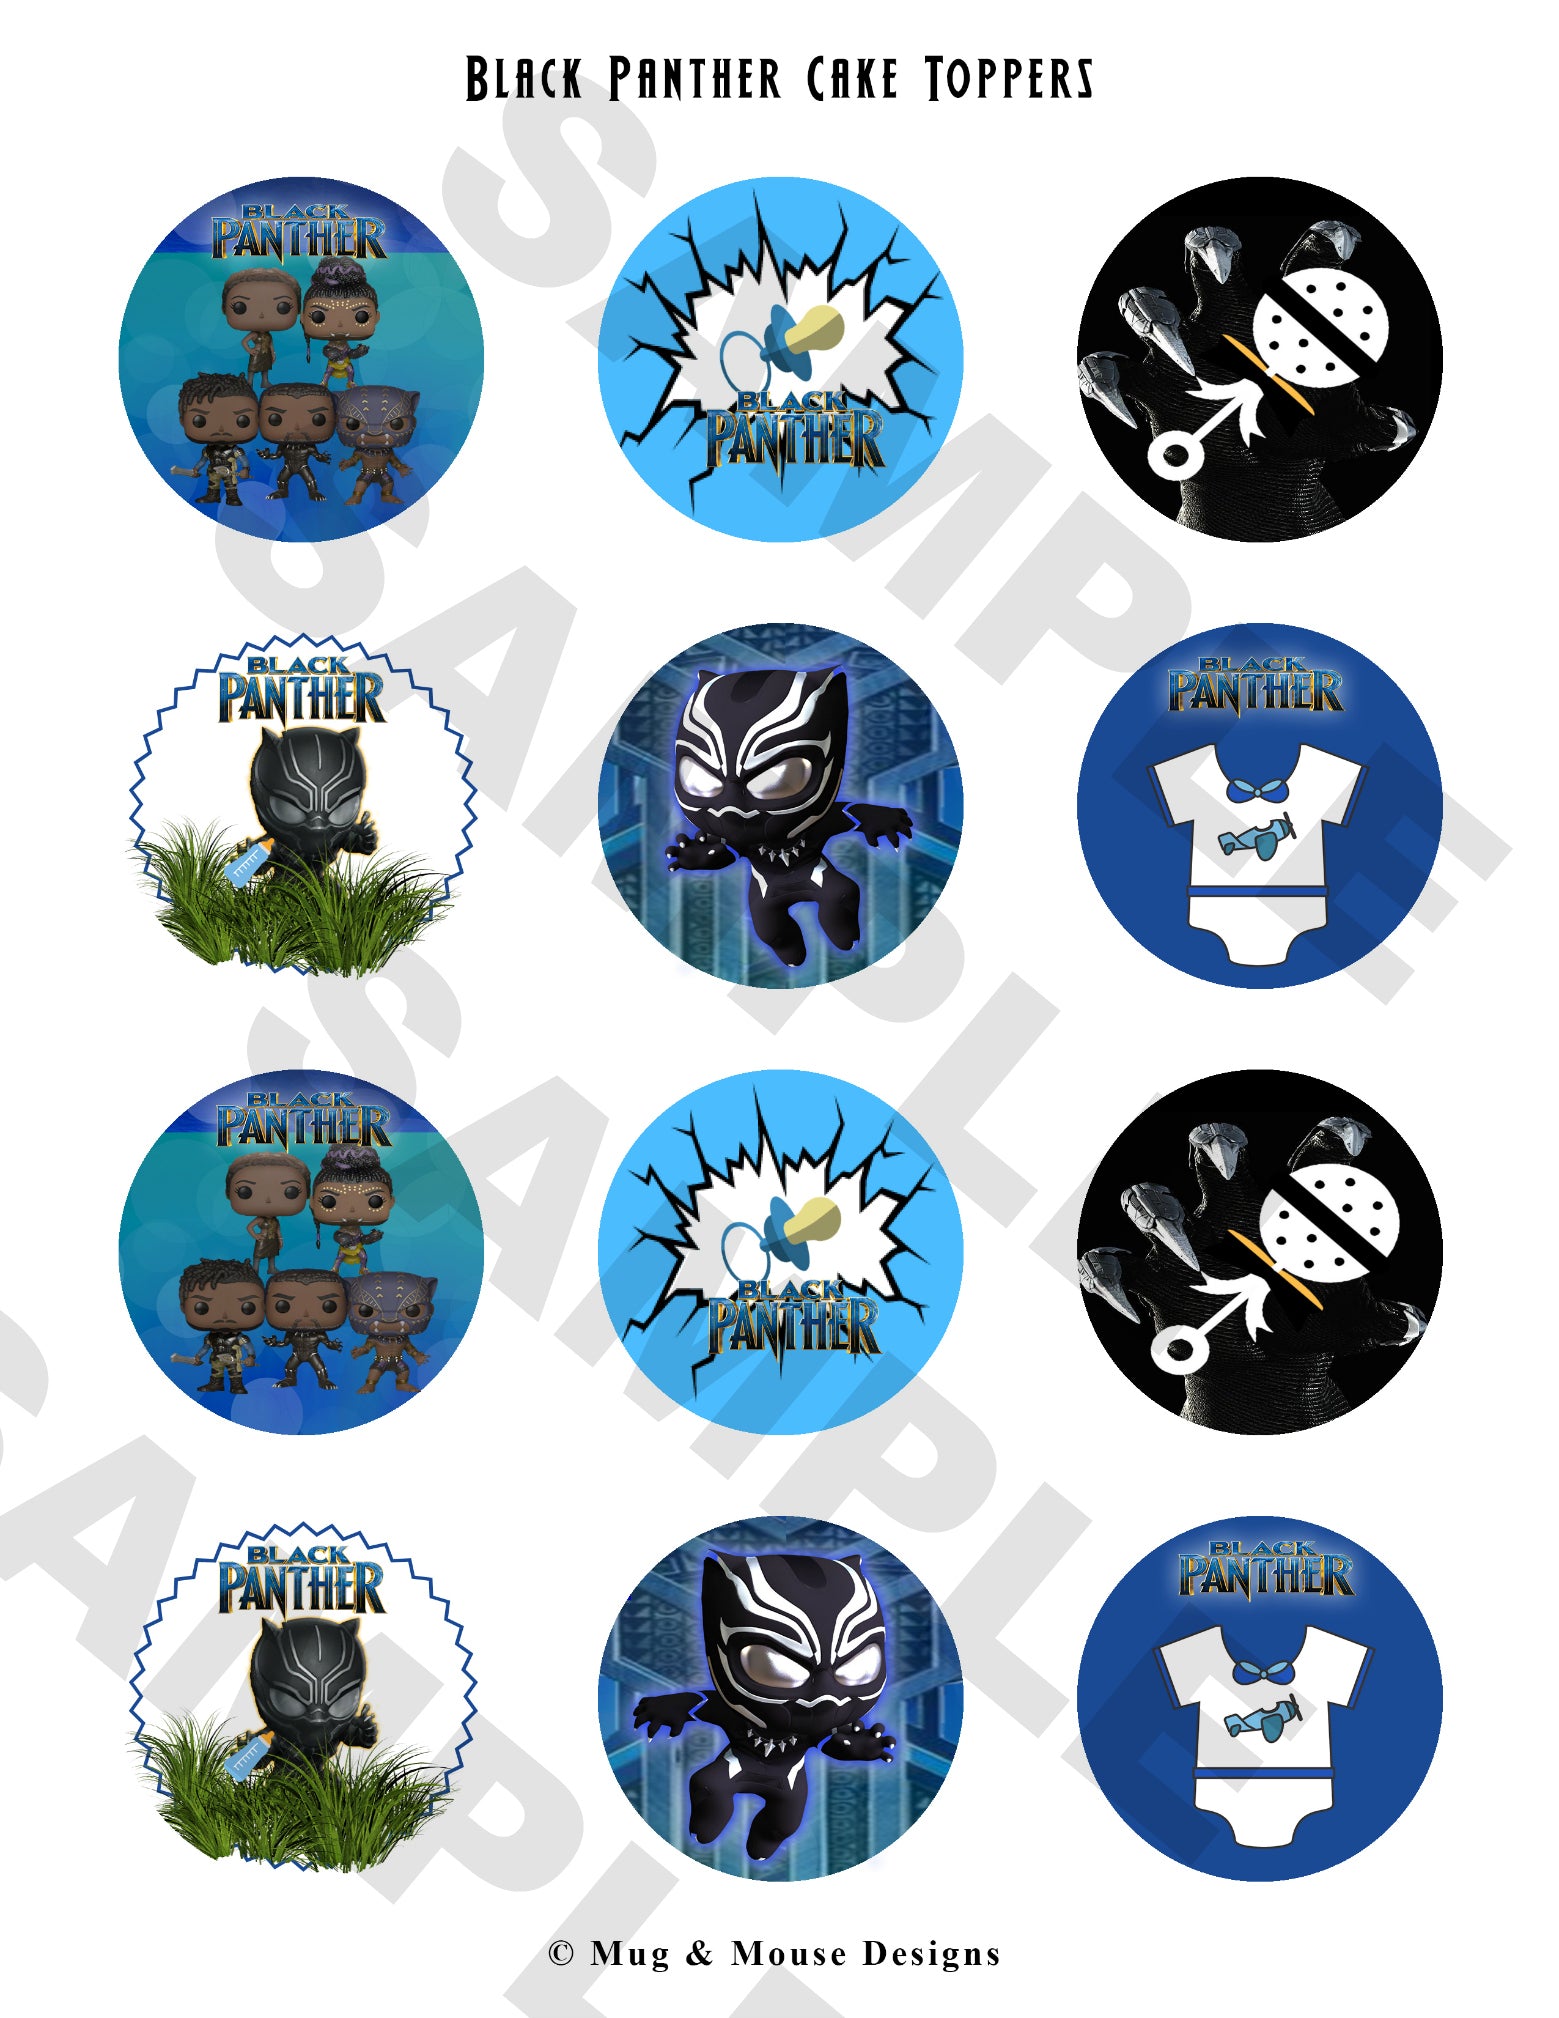 Black Panther Cake Topper Edible. | The Cake Fairy Craft